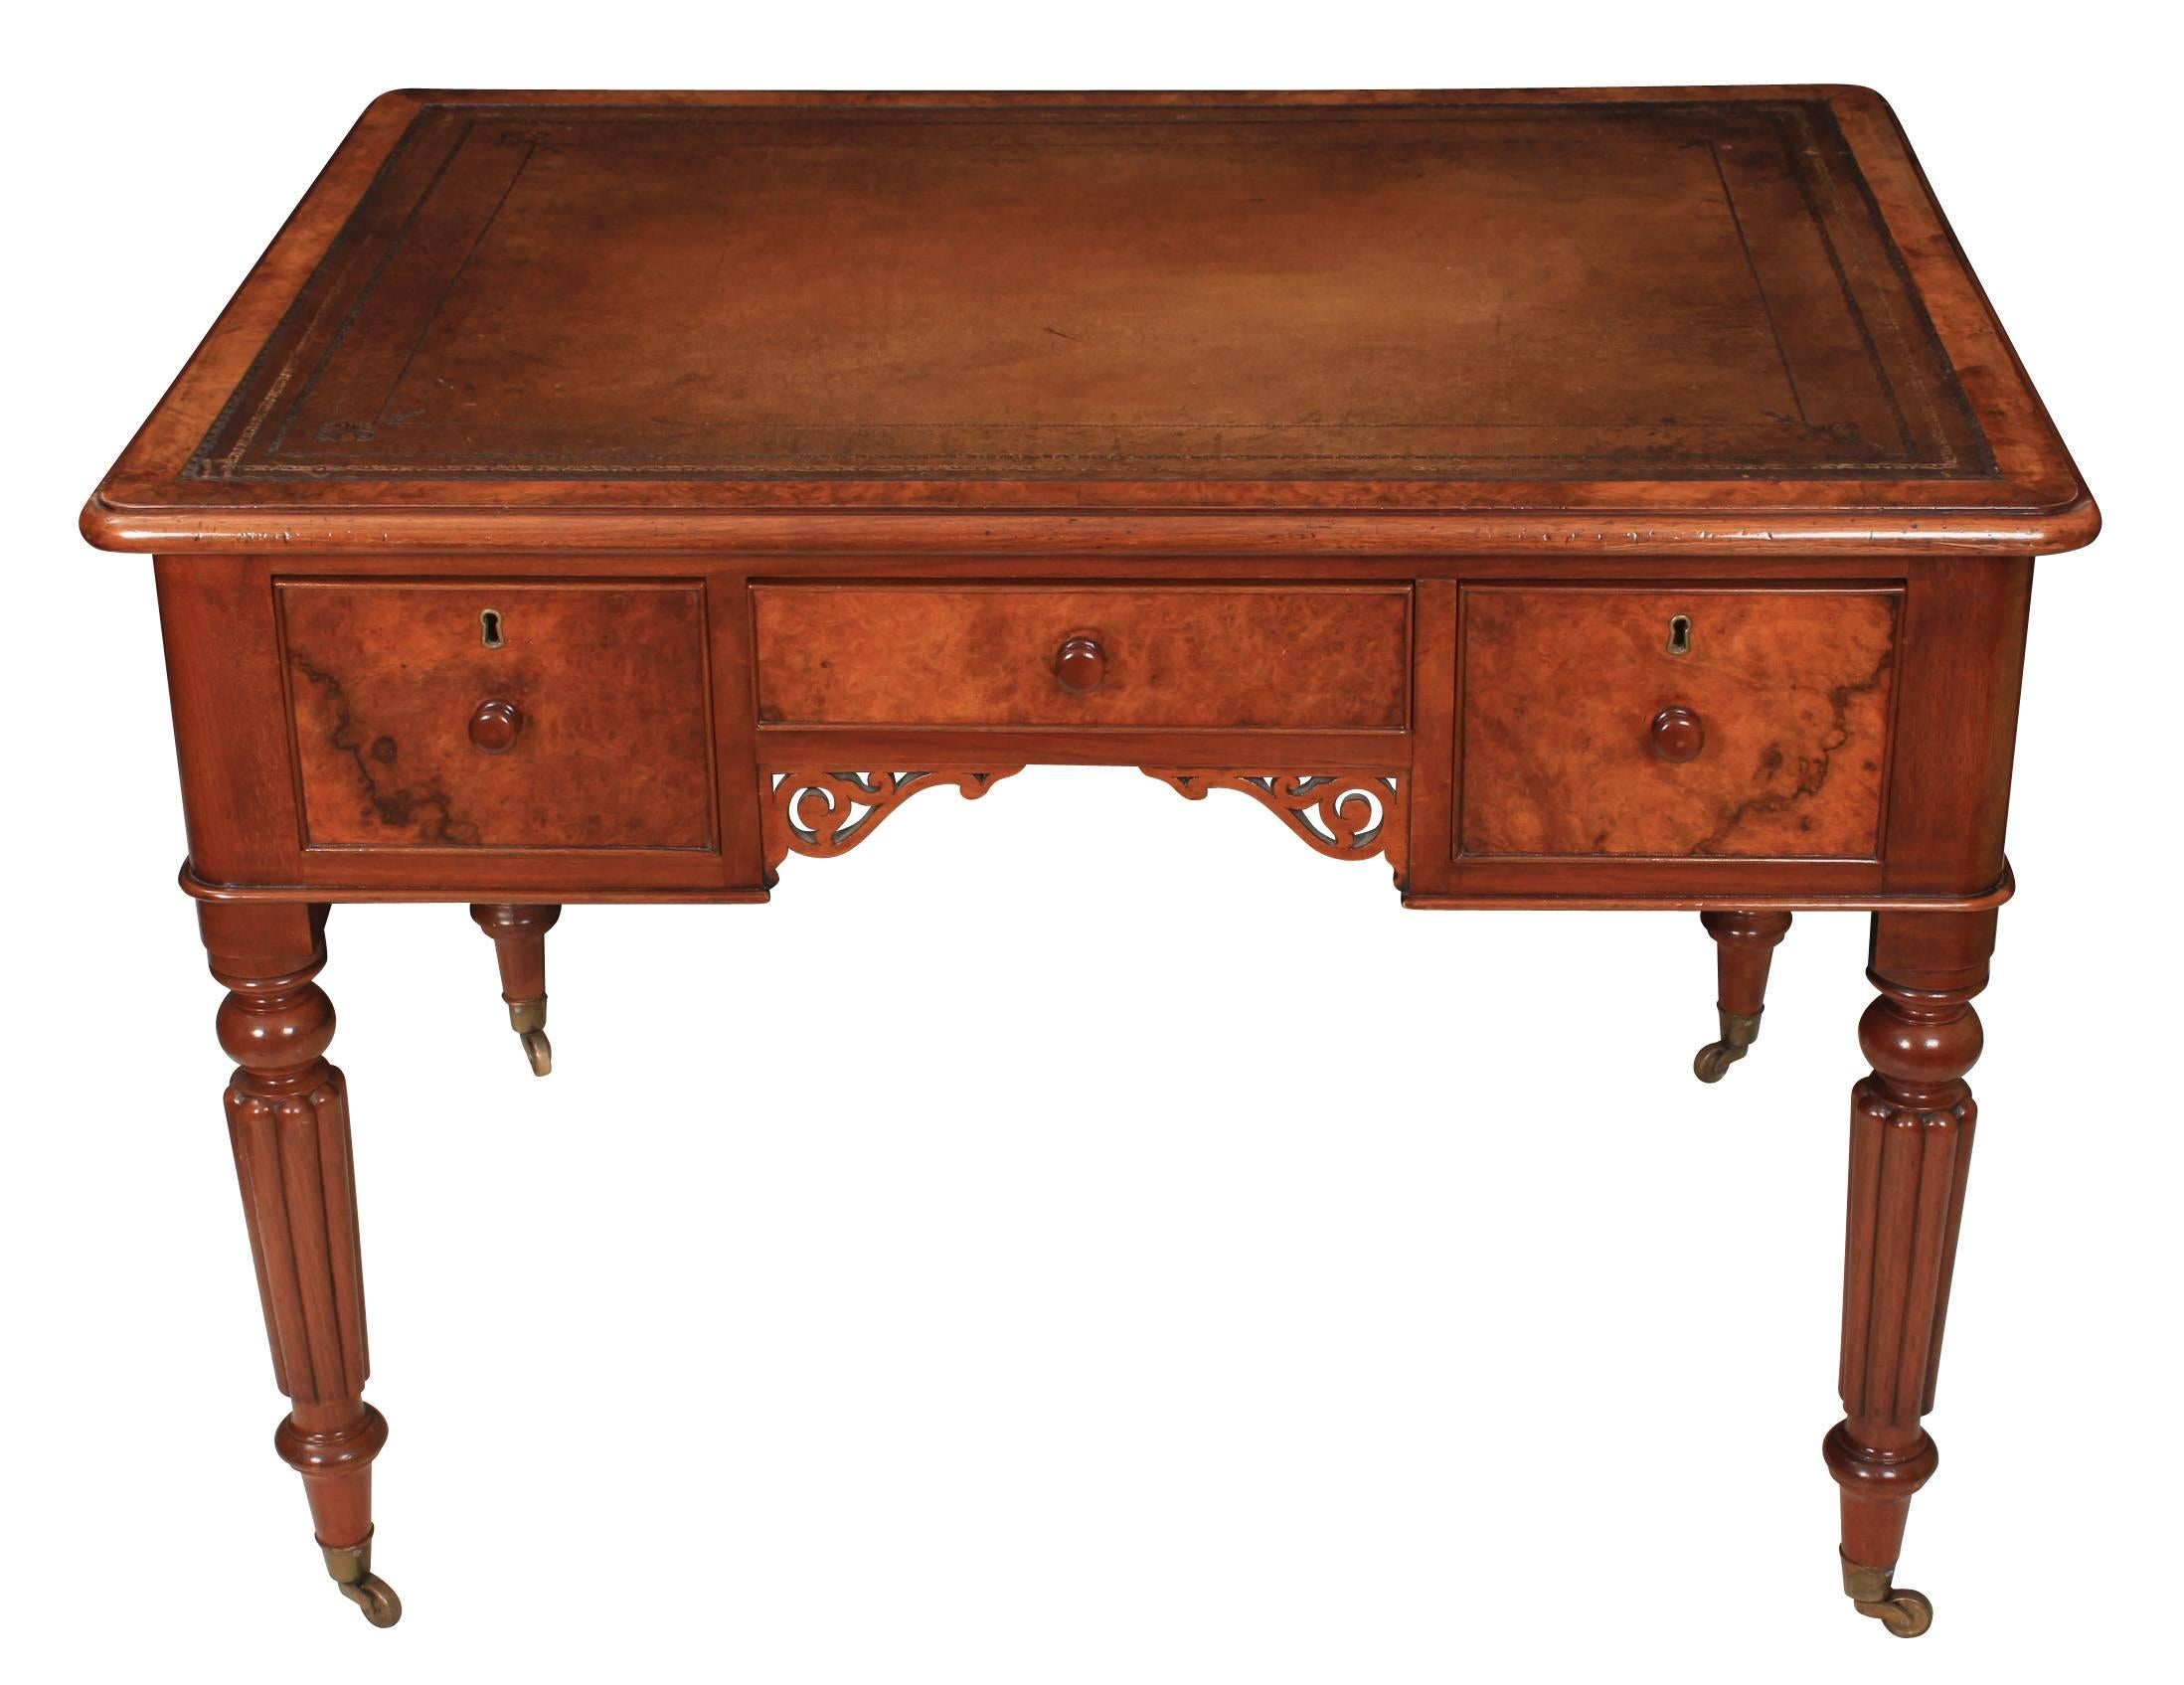 English, circa 1840.
This walnut writing table is in superb condition ready for the home or office.
Beautiful burr walnut top, with inset hand dyed tan leather writing surface, over three stationary drawers of solid mahogany dovetailed